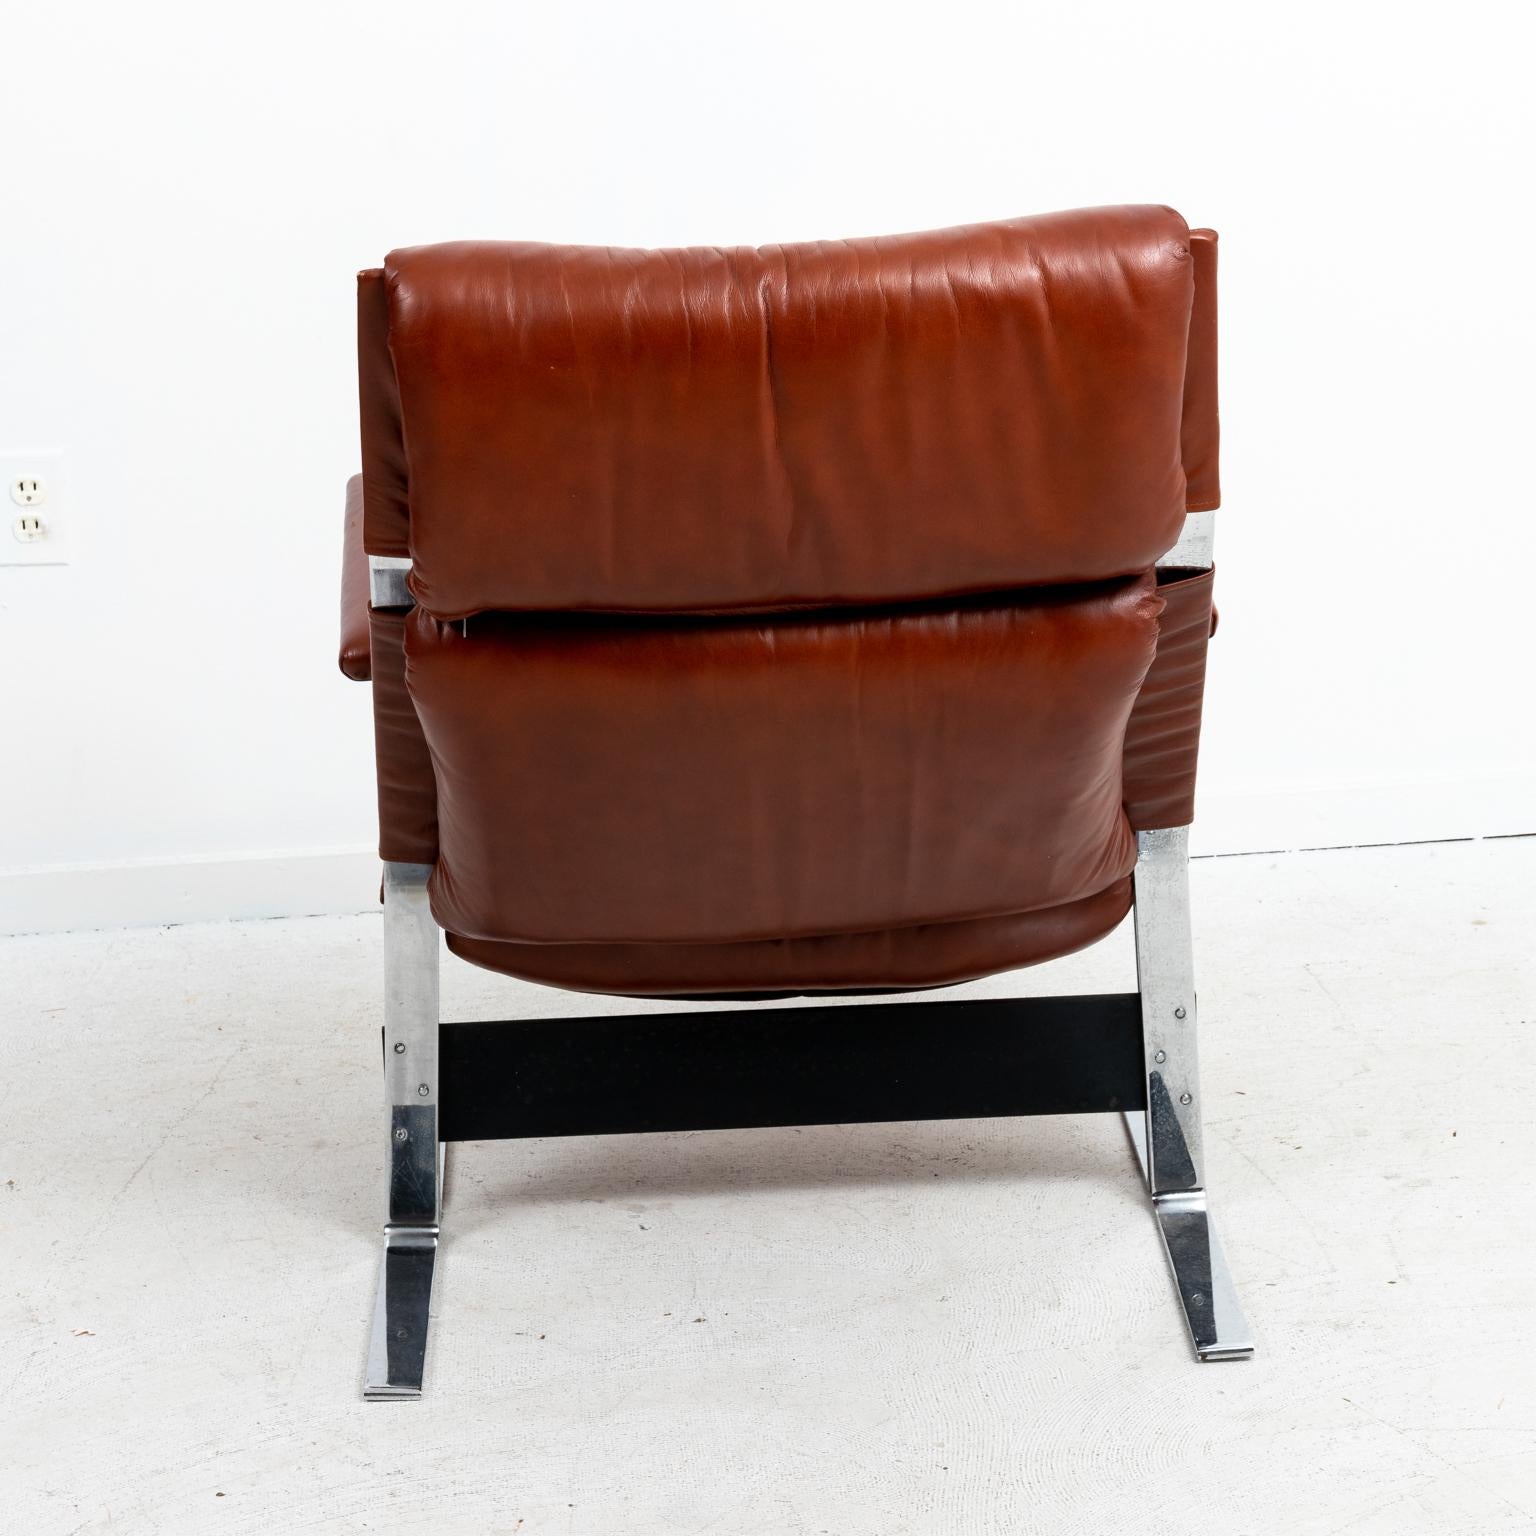 Mid-Century Modern style leather upholstered chairs with matching ottomans and polished metal frame. Please note of wear consistent with age as seen on the leather along with patina to the metal. The ottomans measure 26.00 Inches wide by 20.00